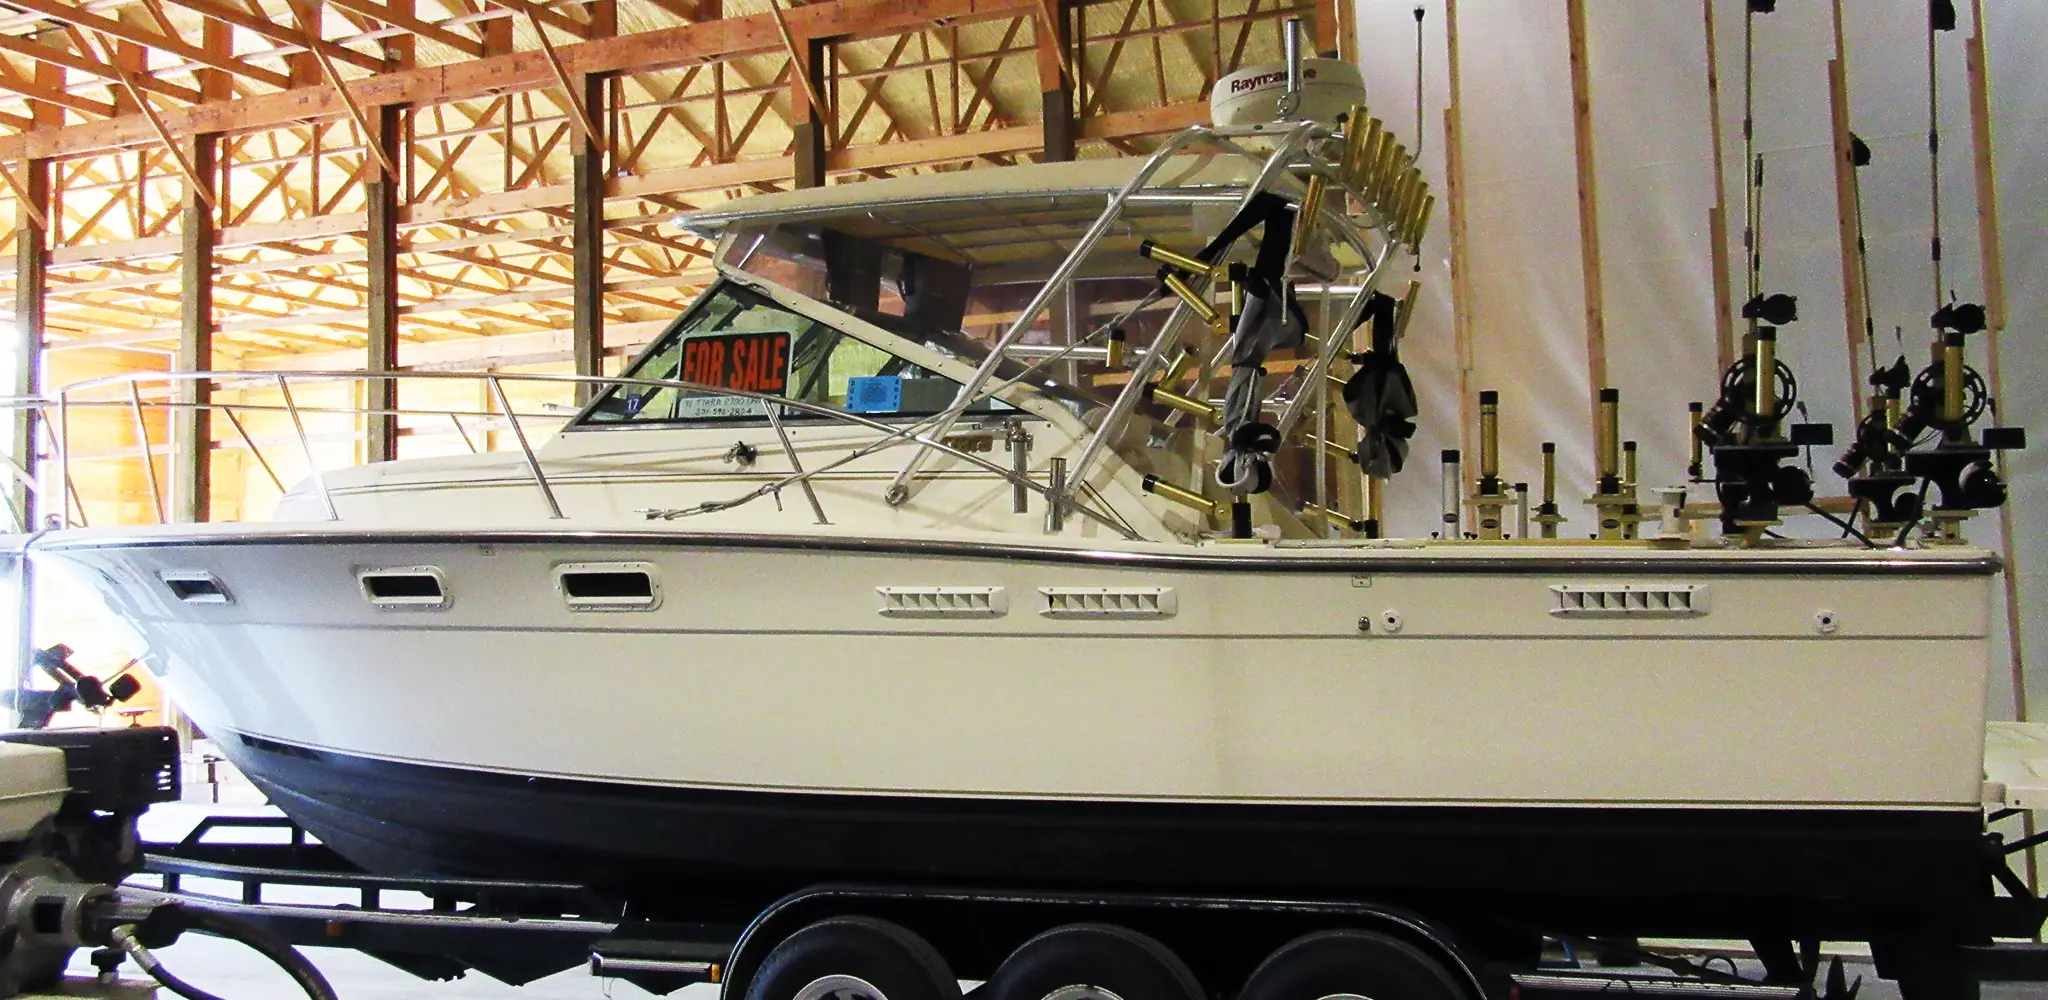 The Best Things to Do to Prepare Your Boat for Sale